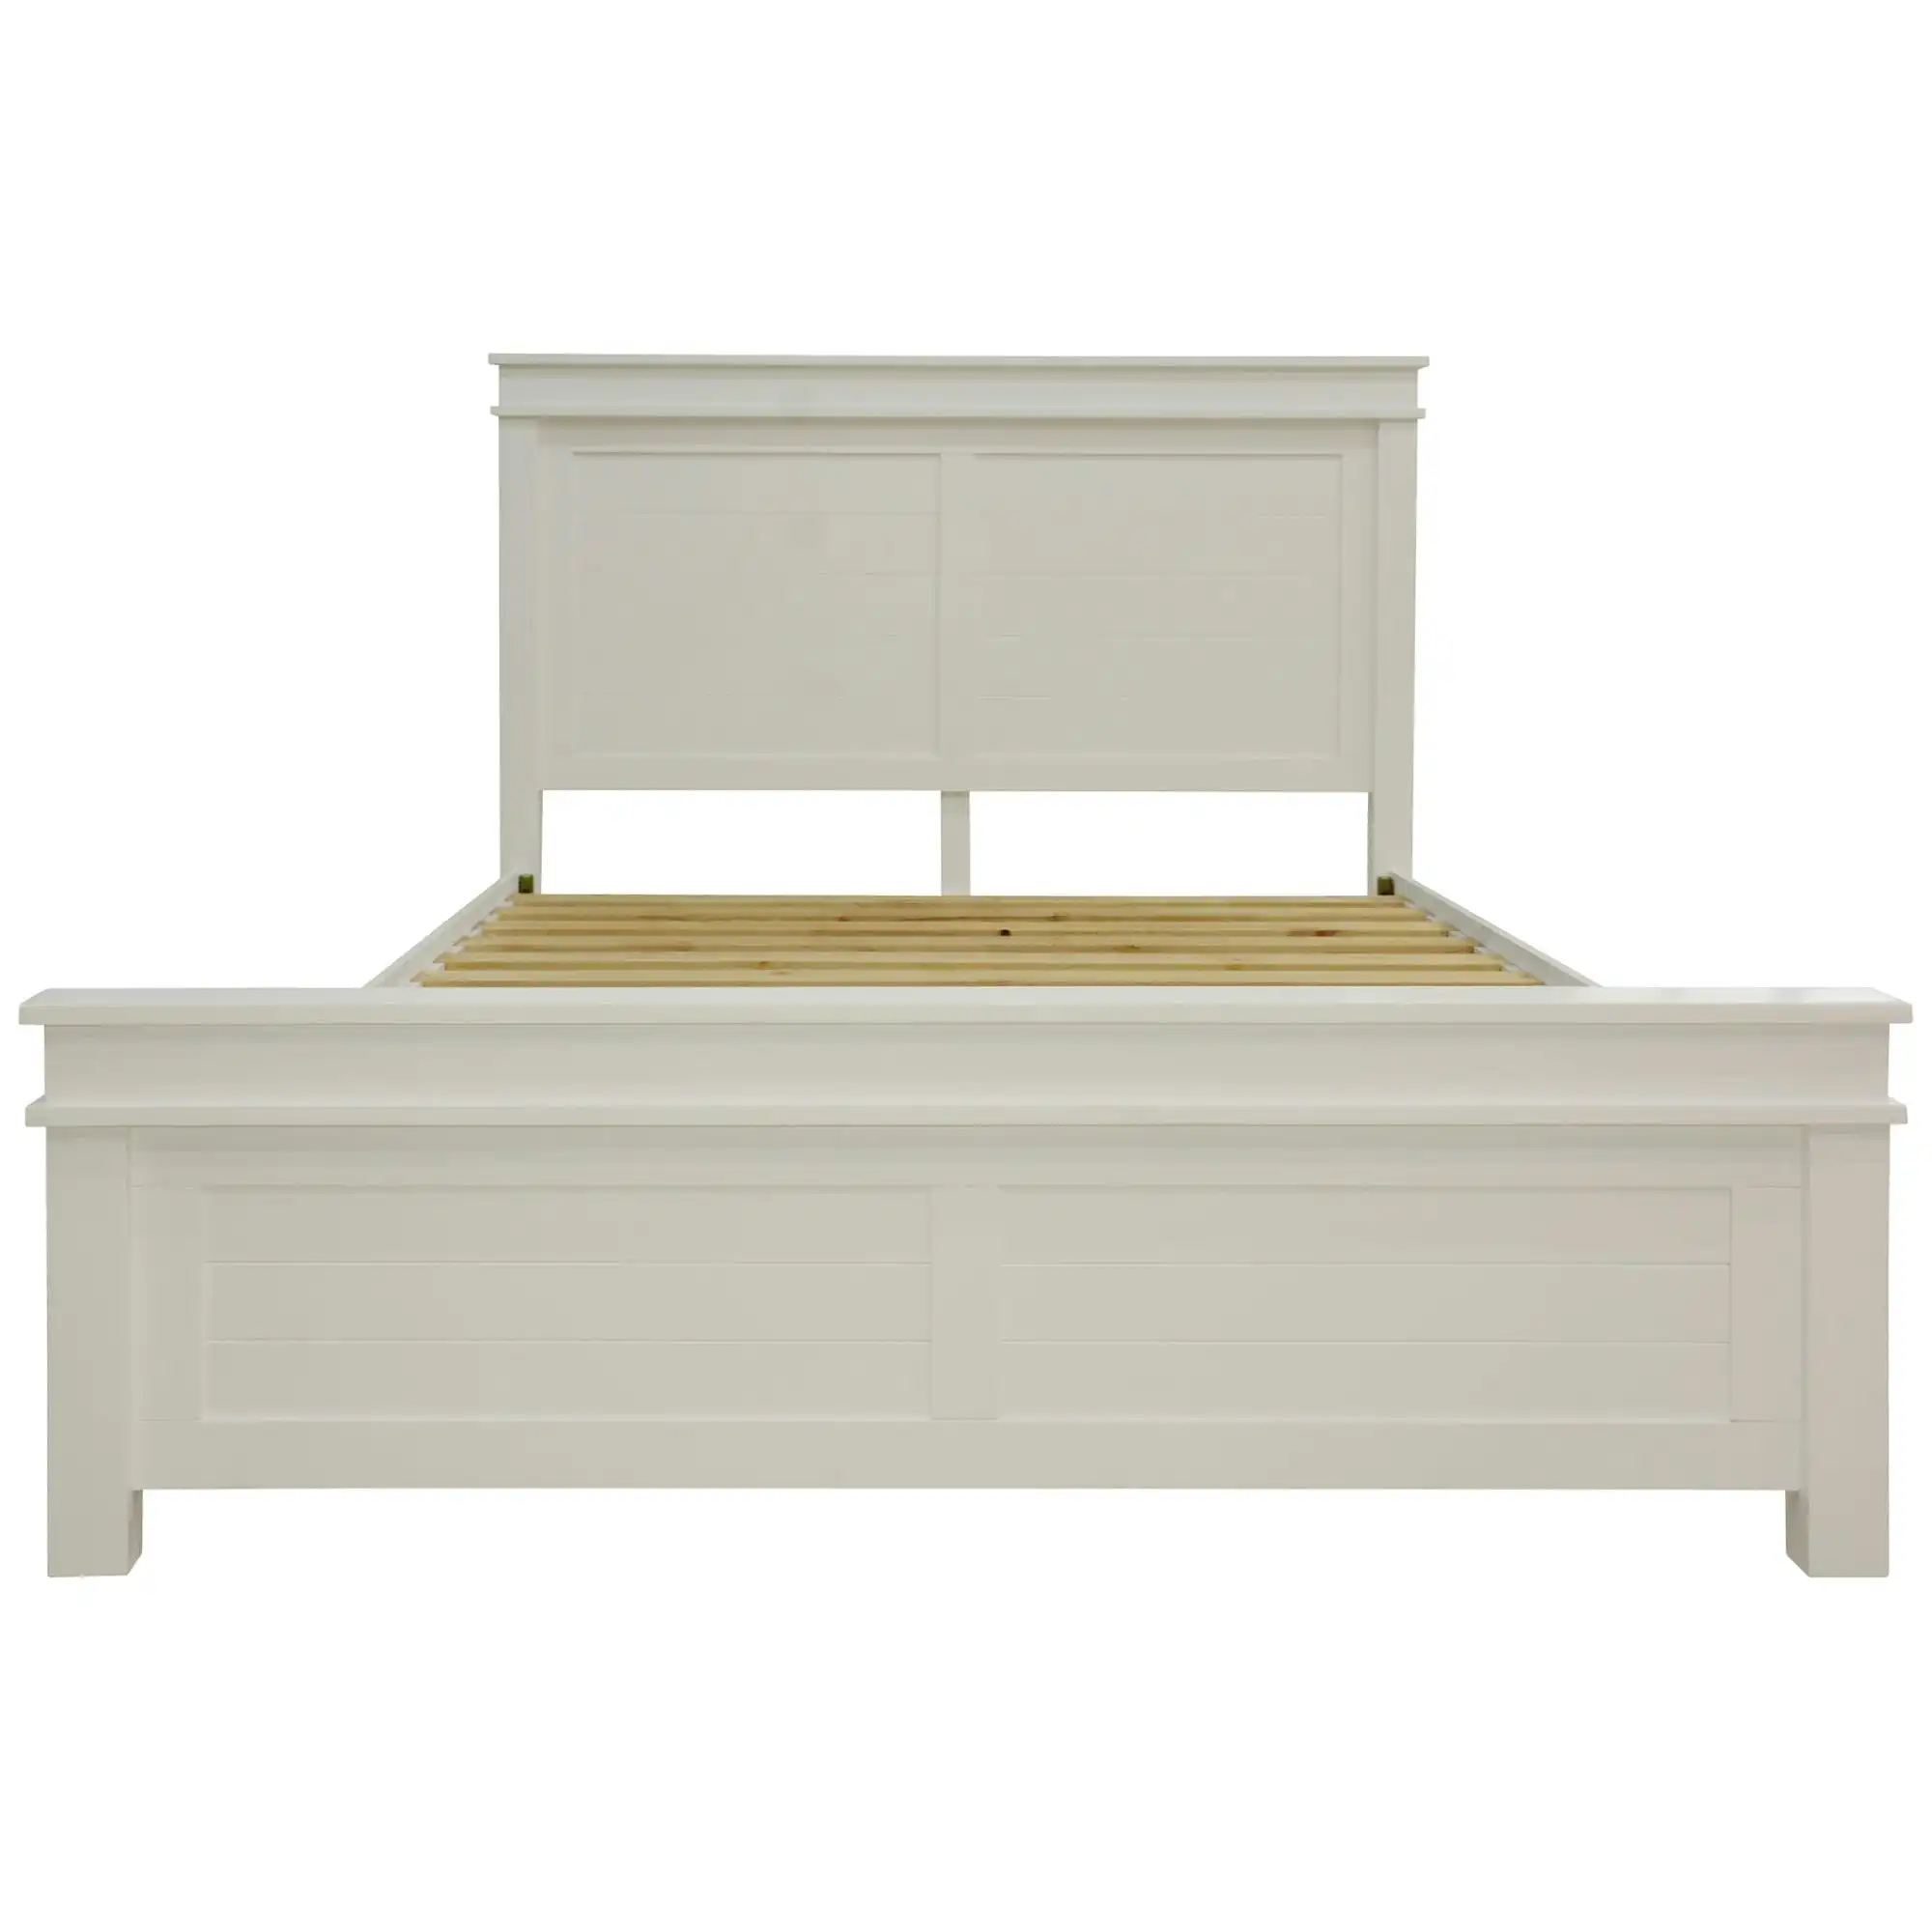 Lily King Bed Frame